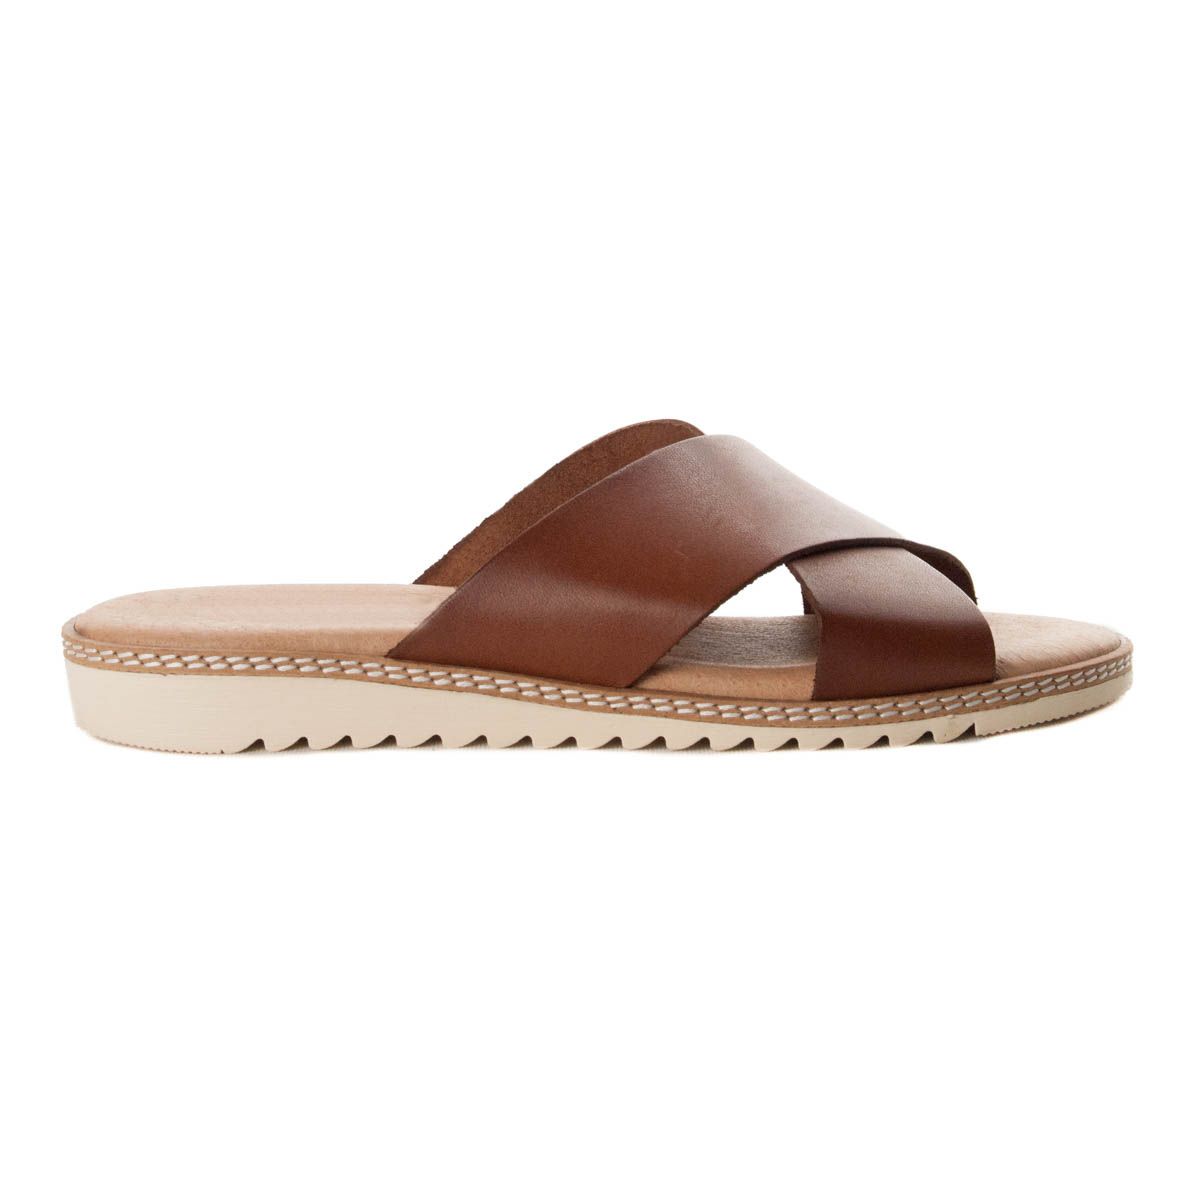 Natural skin wedge sandal, with maximum comfort on the plant, by its gel, soft and padded template. It looked like you walk on a mattress. Anatomical Anti-slip sole. Very summer for his style. Made in Spain.